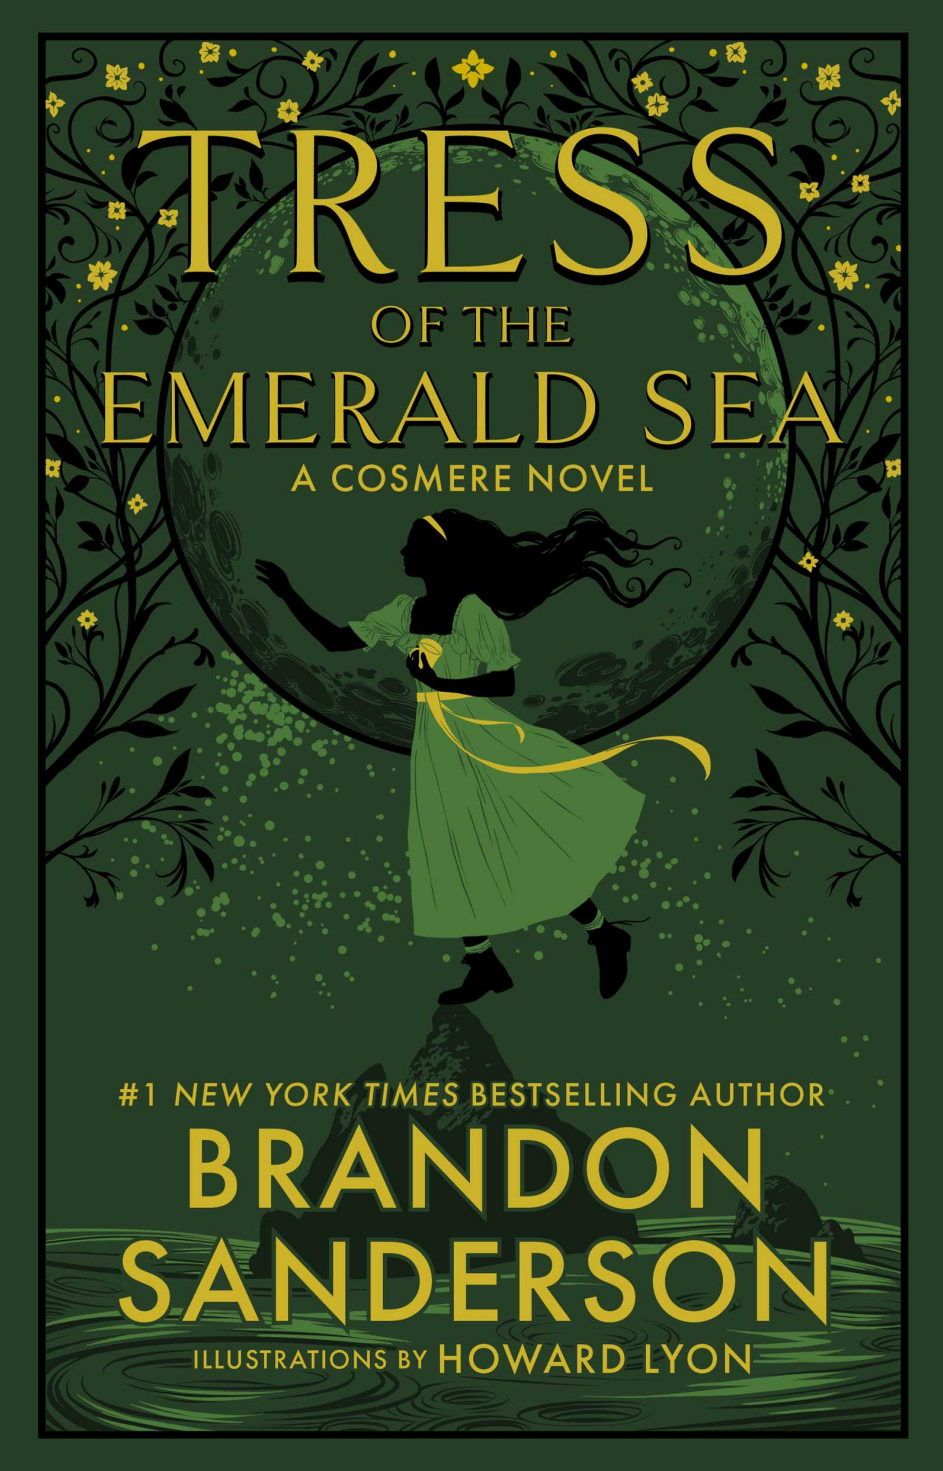 cover of Tress of the Emerald Sea  Brandon Sanderson ,  illustrated by Howard Lyon